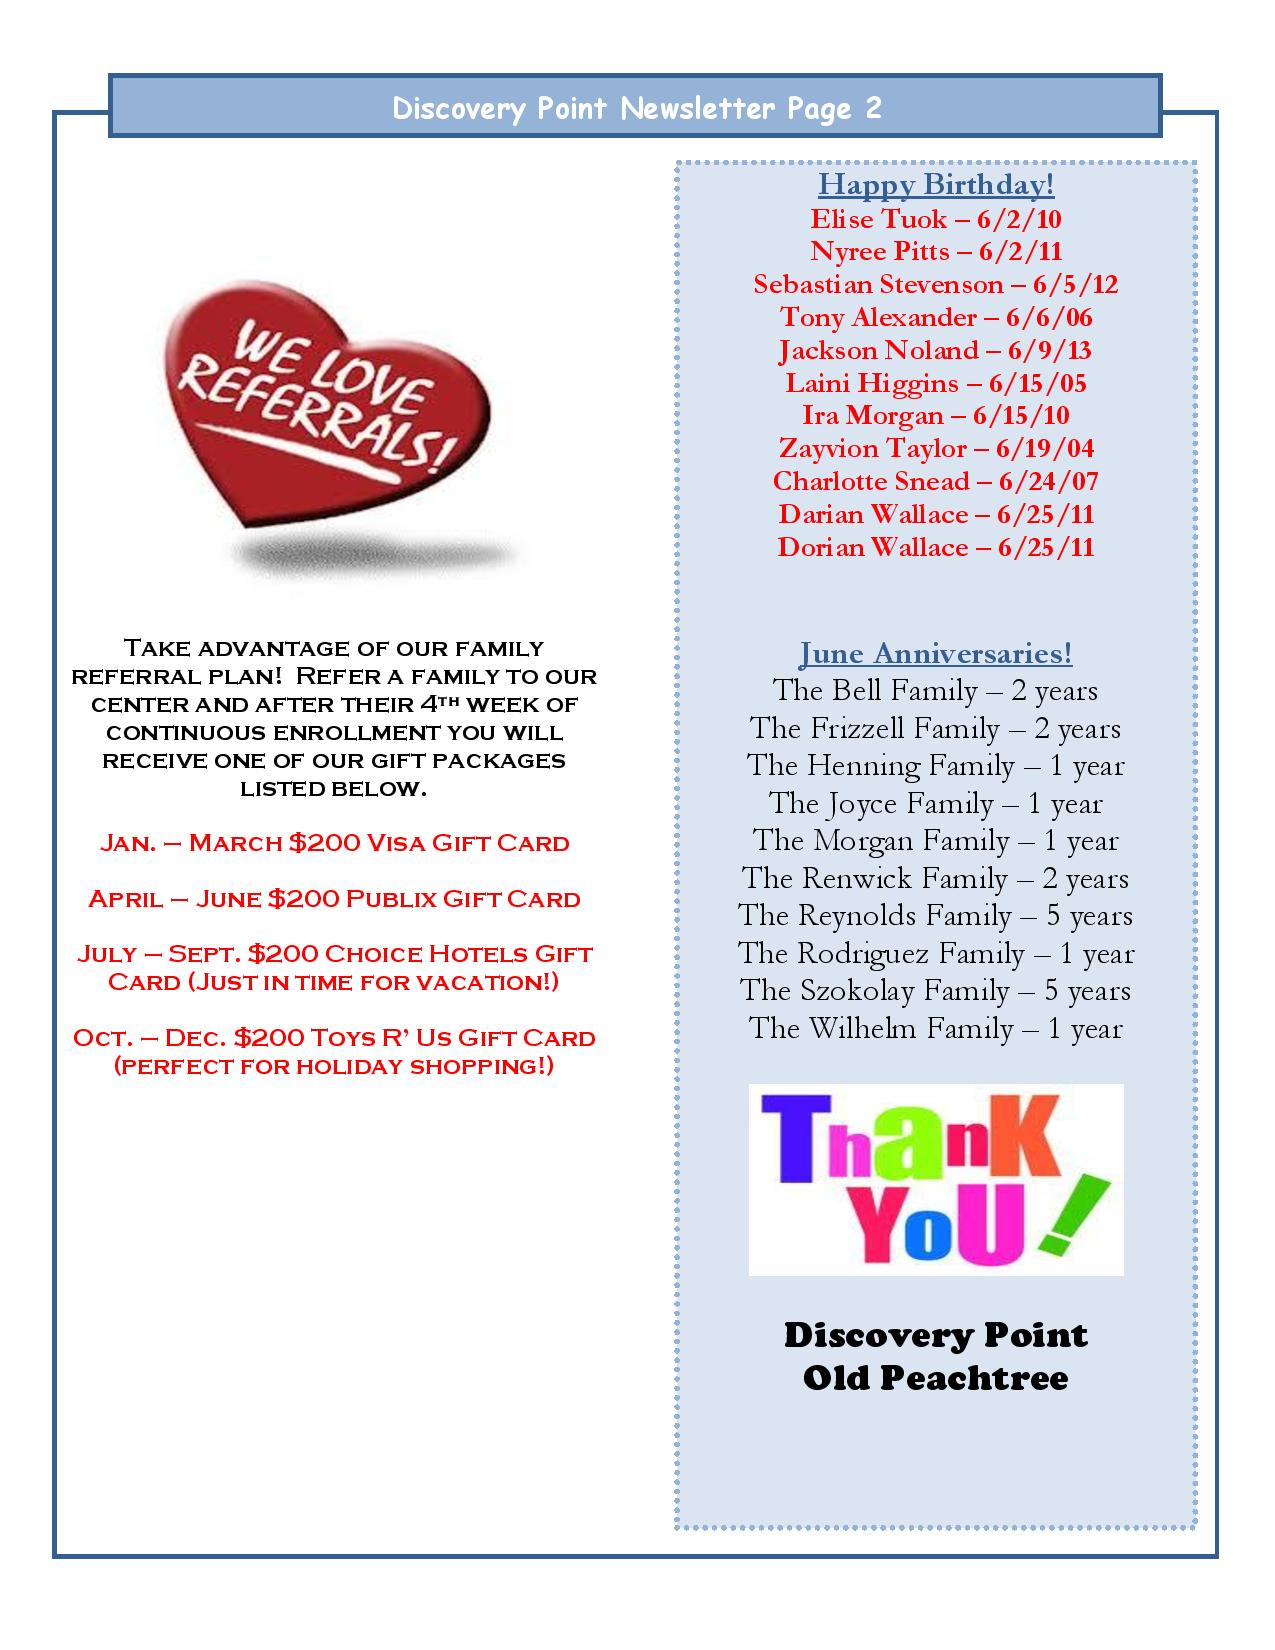 Discovery Point Old Peachtree June 2015 Newsletter Page 2